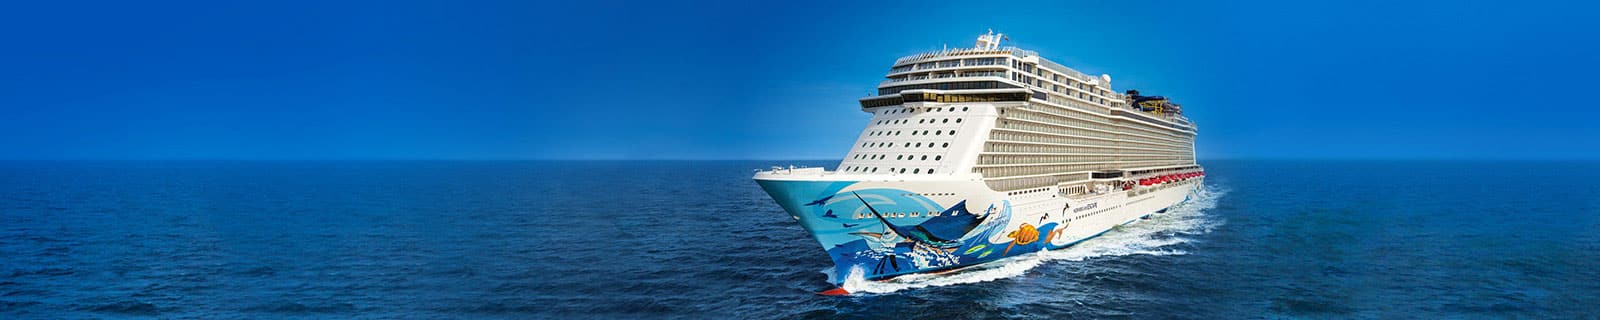 Image of Norwegian Escape, sourced from: Norwegian Cruise Line https://touristwire.com/wp-content/uploads/2023/06/MI.ShipsOverview.Escape2.jpg